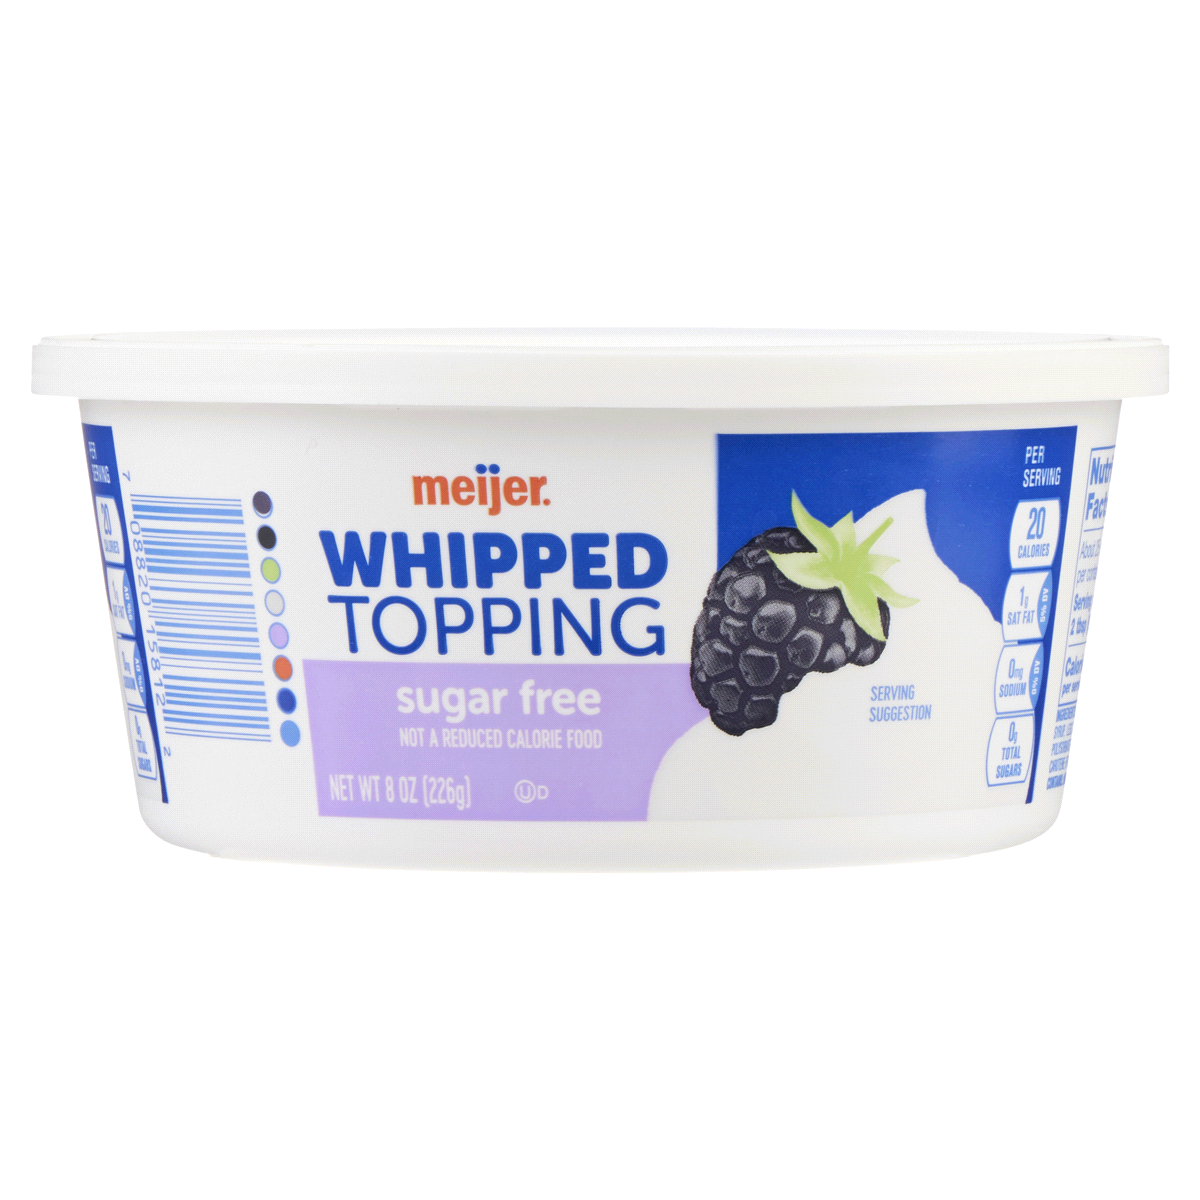 slide 15 of 17, MEIJER WHIPPED TOPPING SUGAR FREE, 8 oz